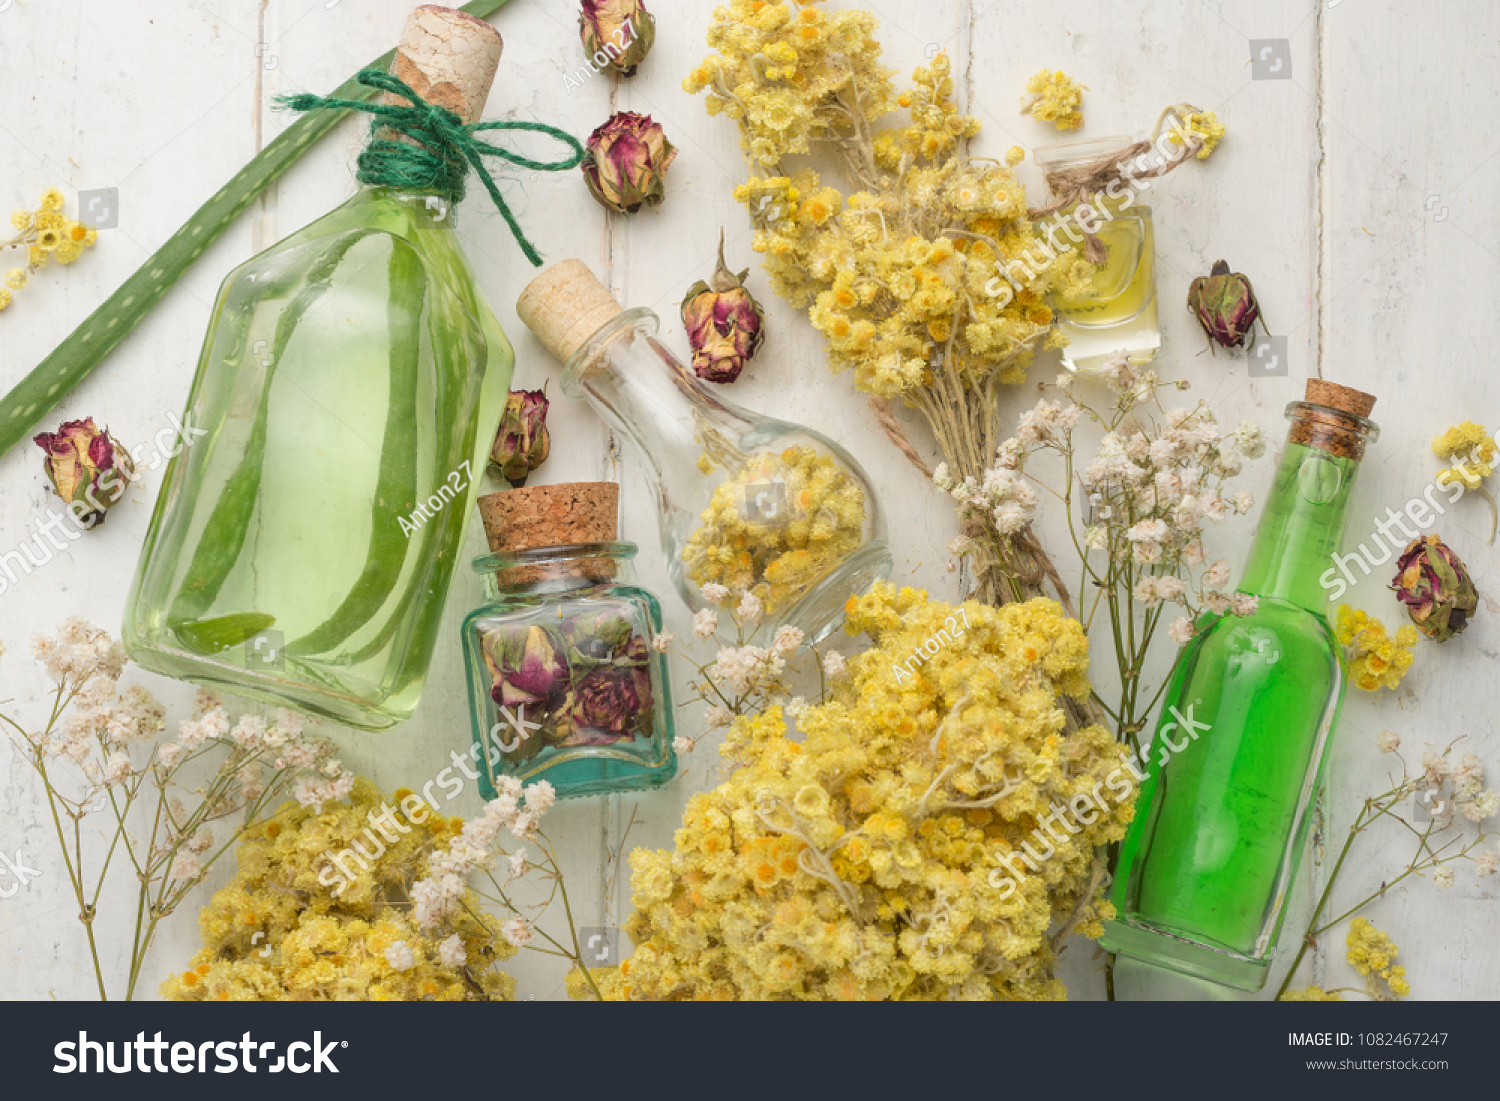 Aromatic oil, aromatic herbs in glass bottles, on a wooden background. The concept of body care and beauty #1082467247